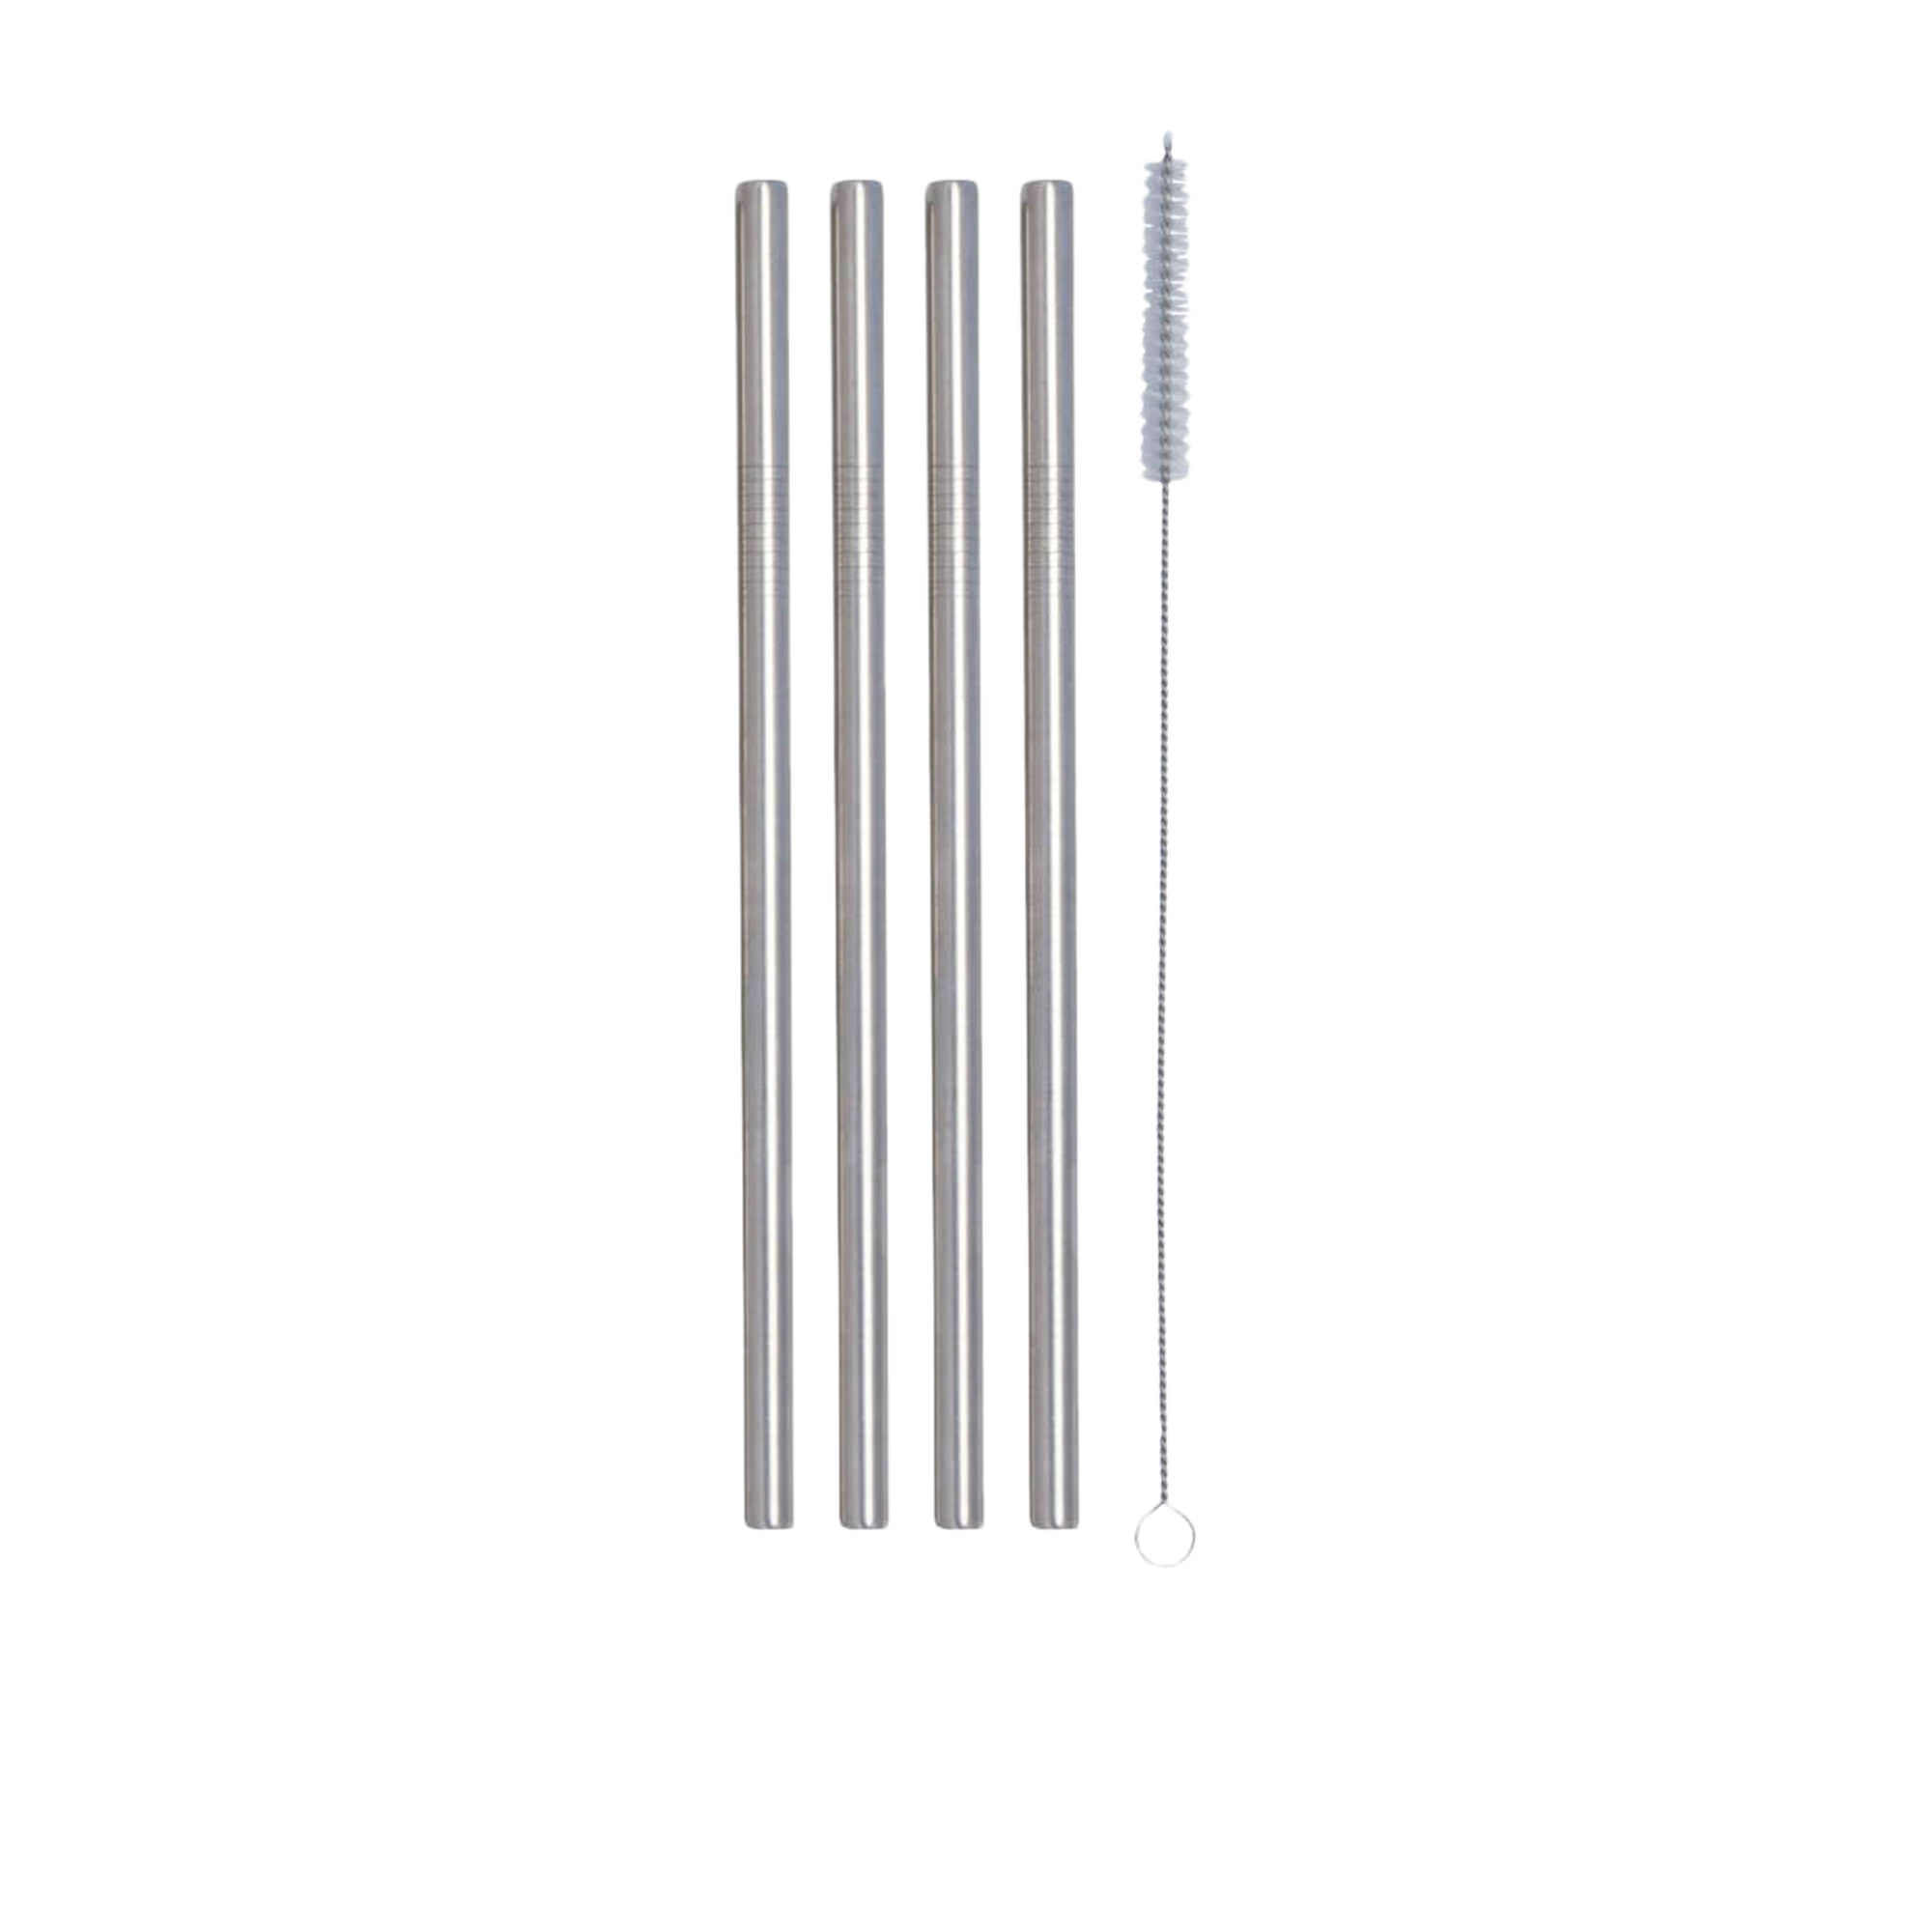 Norpro Stainless-Steel Reusable Silicone Tipped Straws w/Brushes